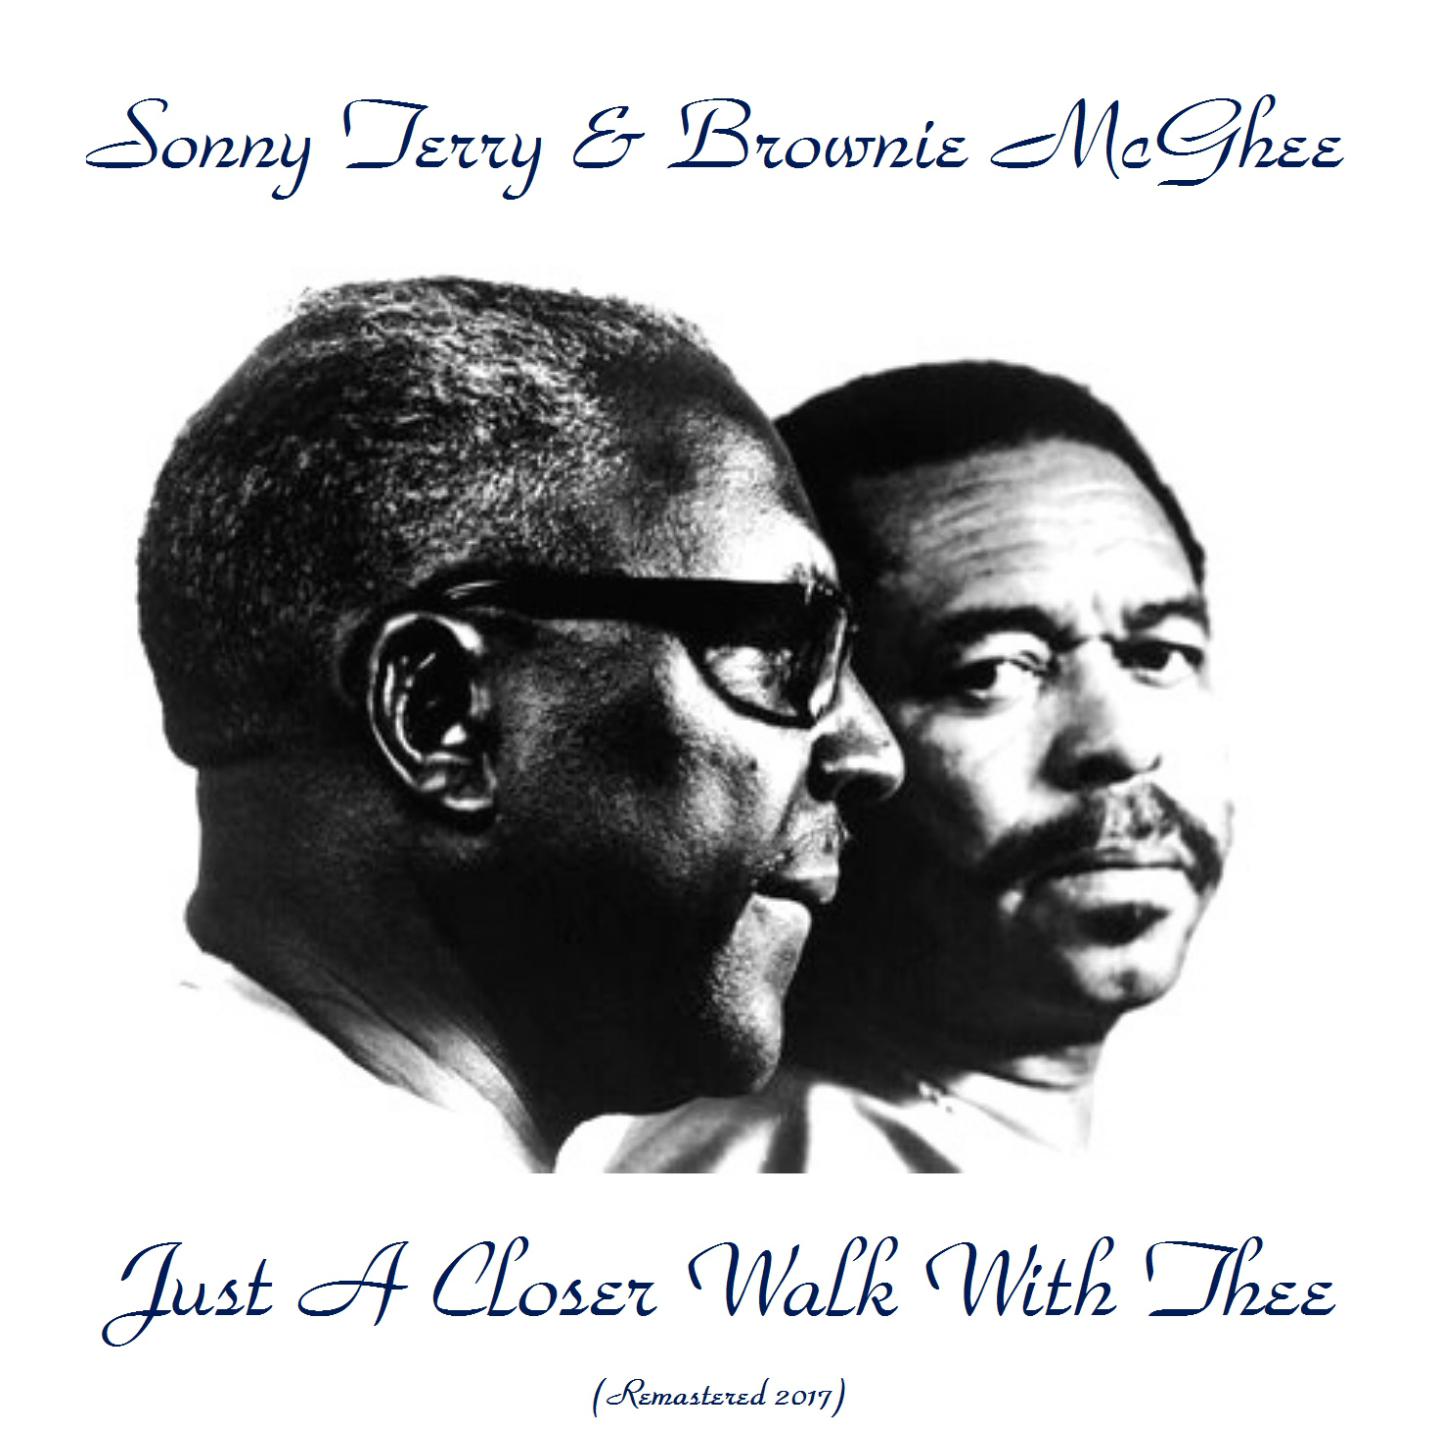 Sonny Terry & Brownie McGhee - I'm Going To Shout (Remastered 2017)